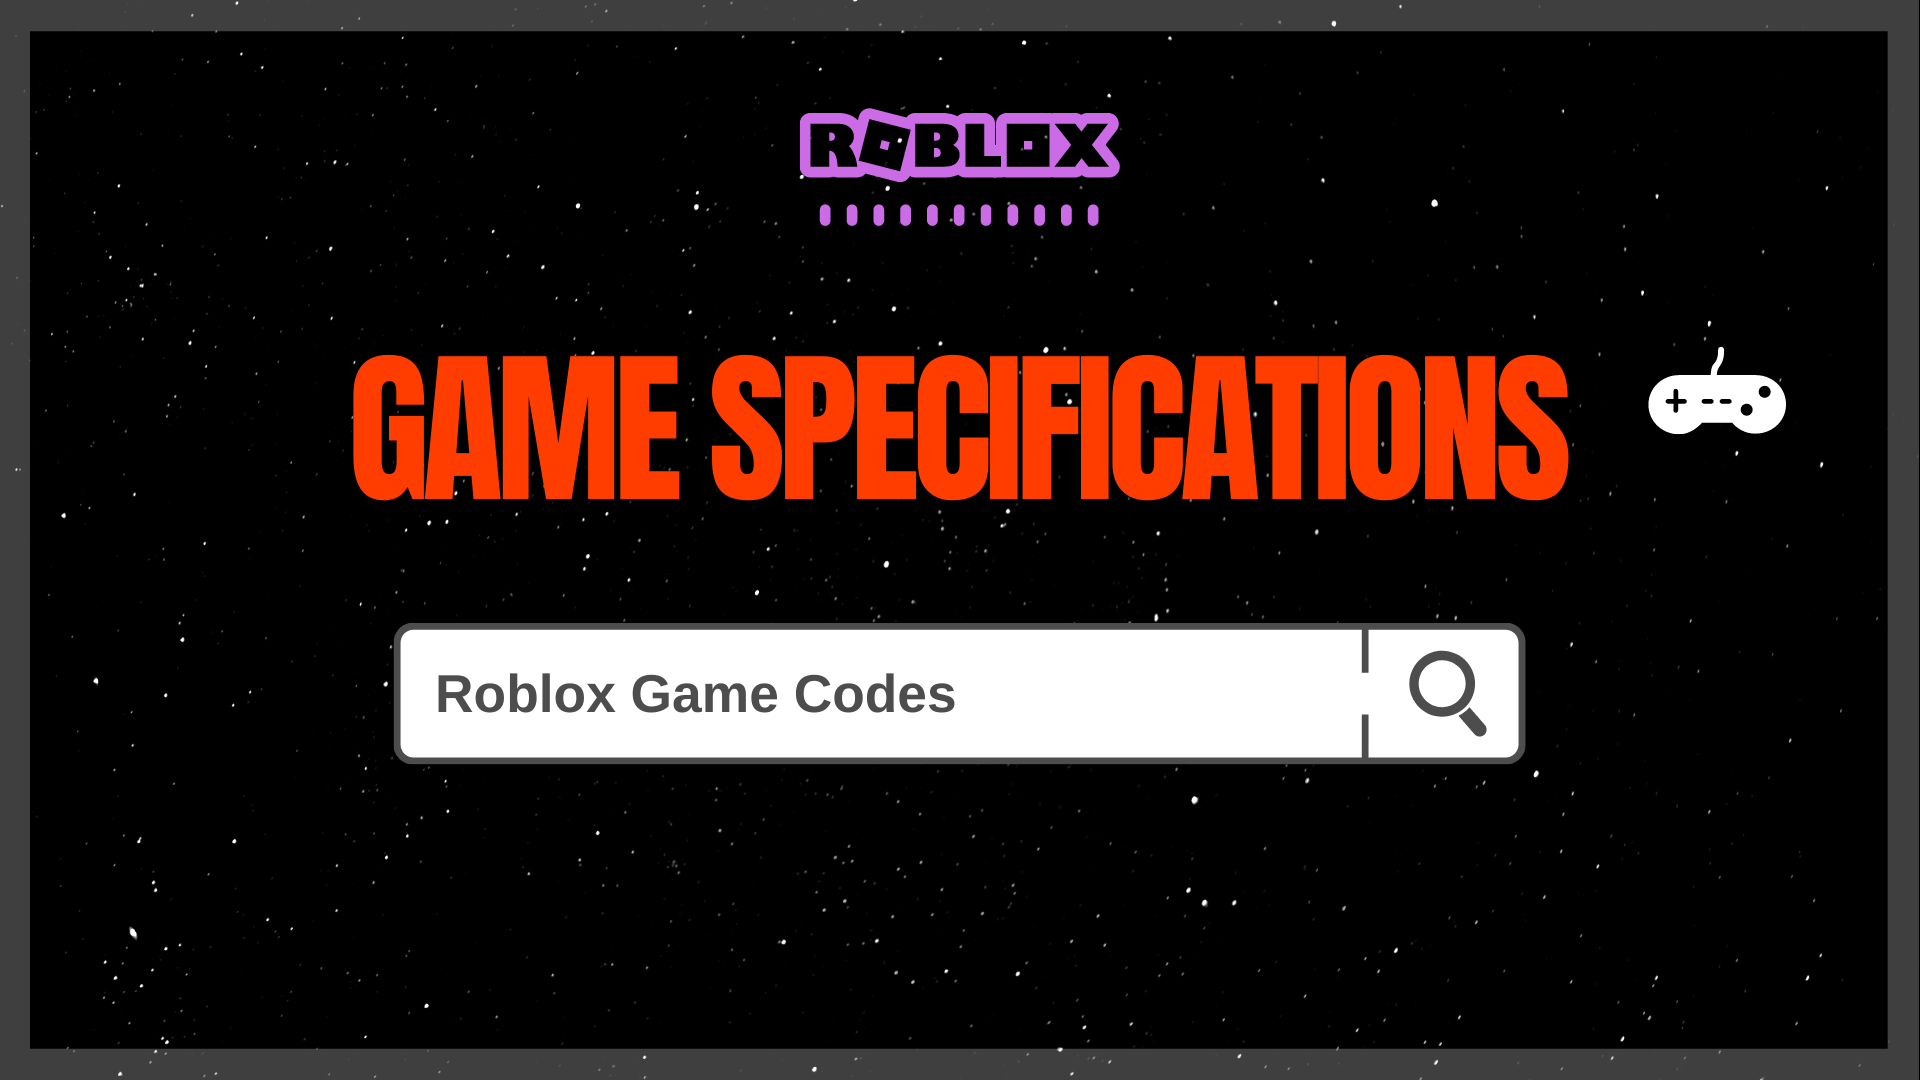 All In One Roblox Game Codes ᐈ Encylopedia Game Specifications - buriedtreasure event roblox